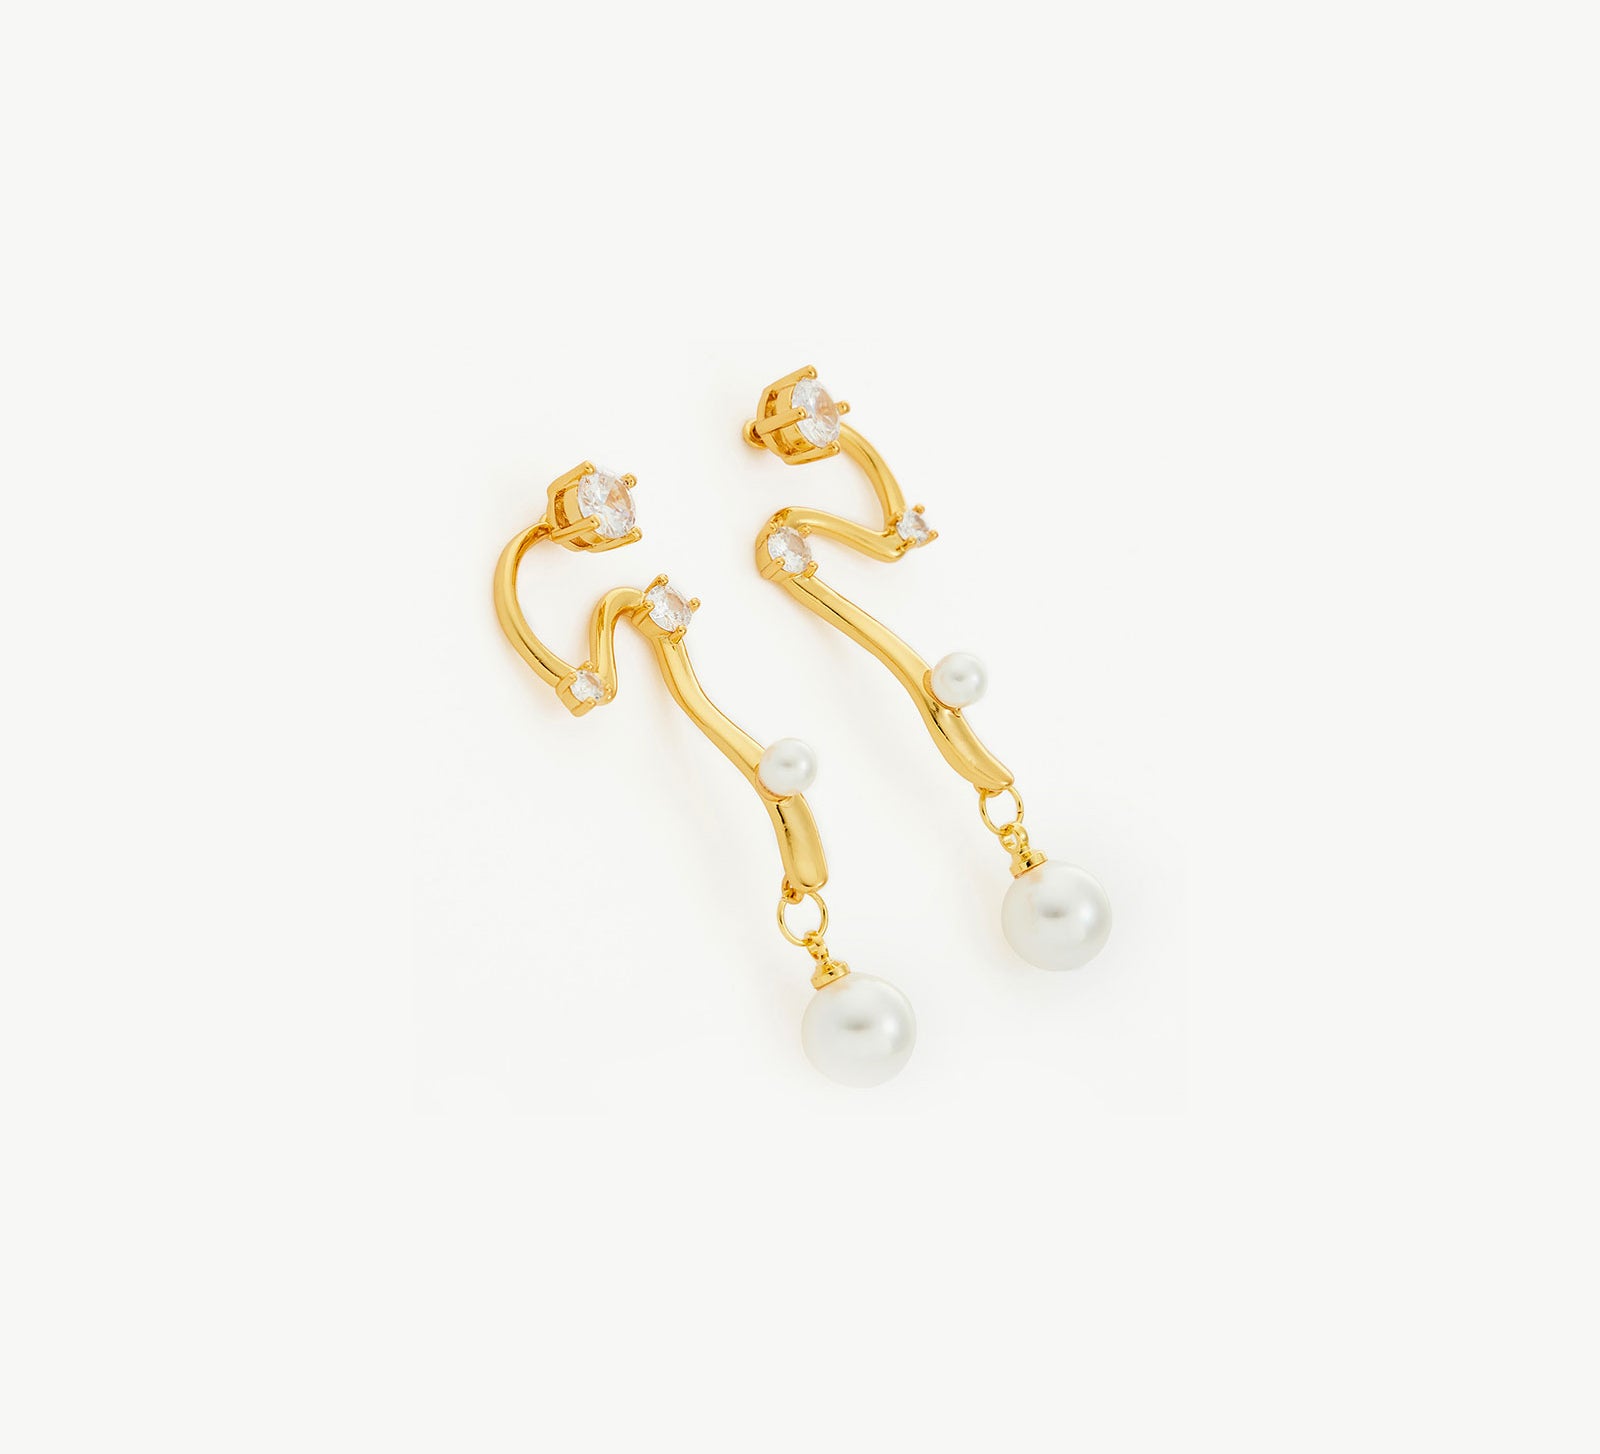 Serpent Pearl Drop Earrings, a captivating blend of serpent-inspired design and elegant pearl drops, creating a sophisticated and alluring accessory for any occasion